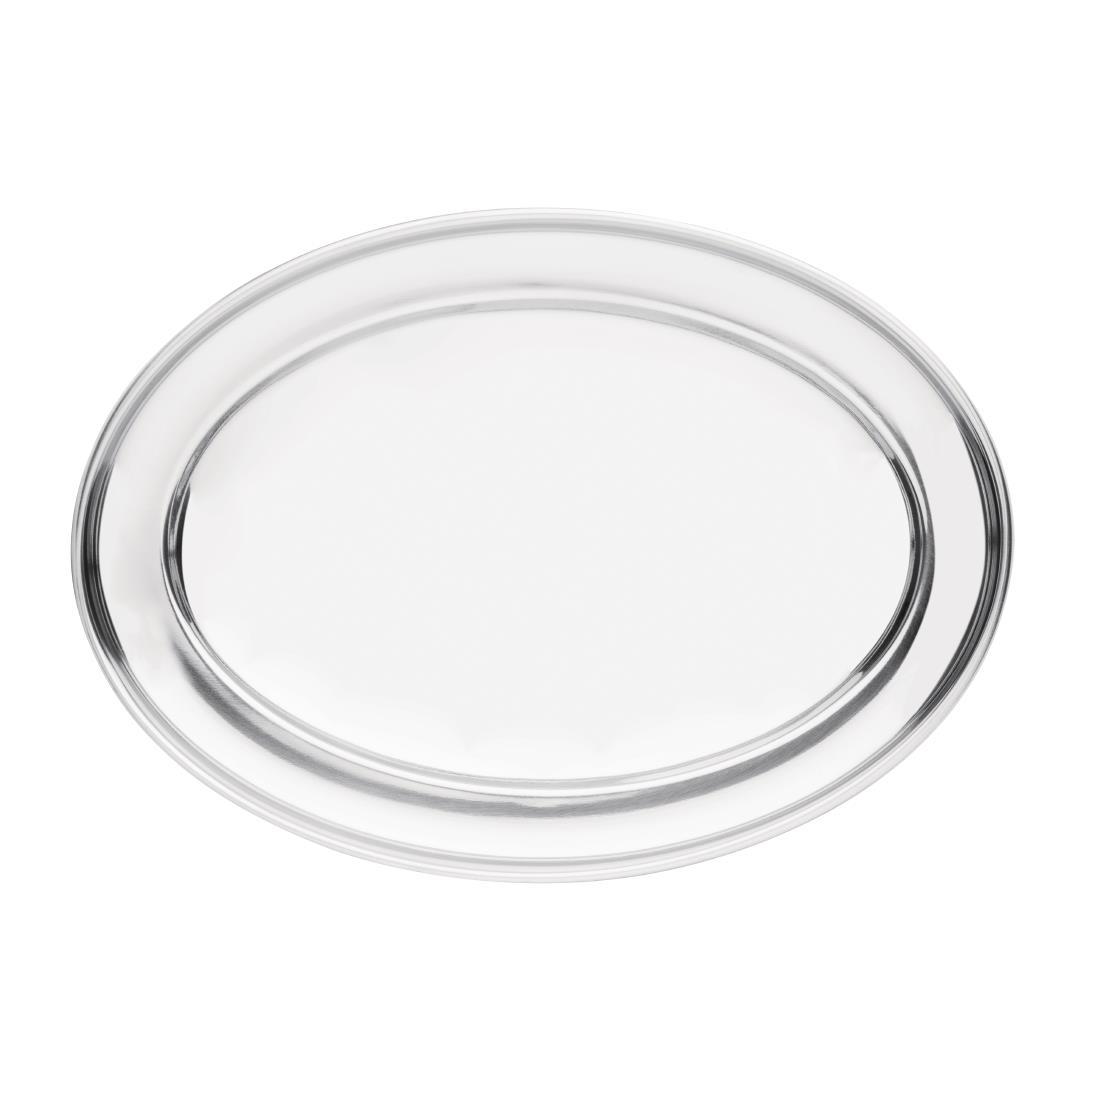 Olympia Stainless Steel Oval Serving Tray 550mm - K368  - 5